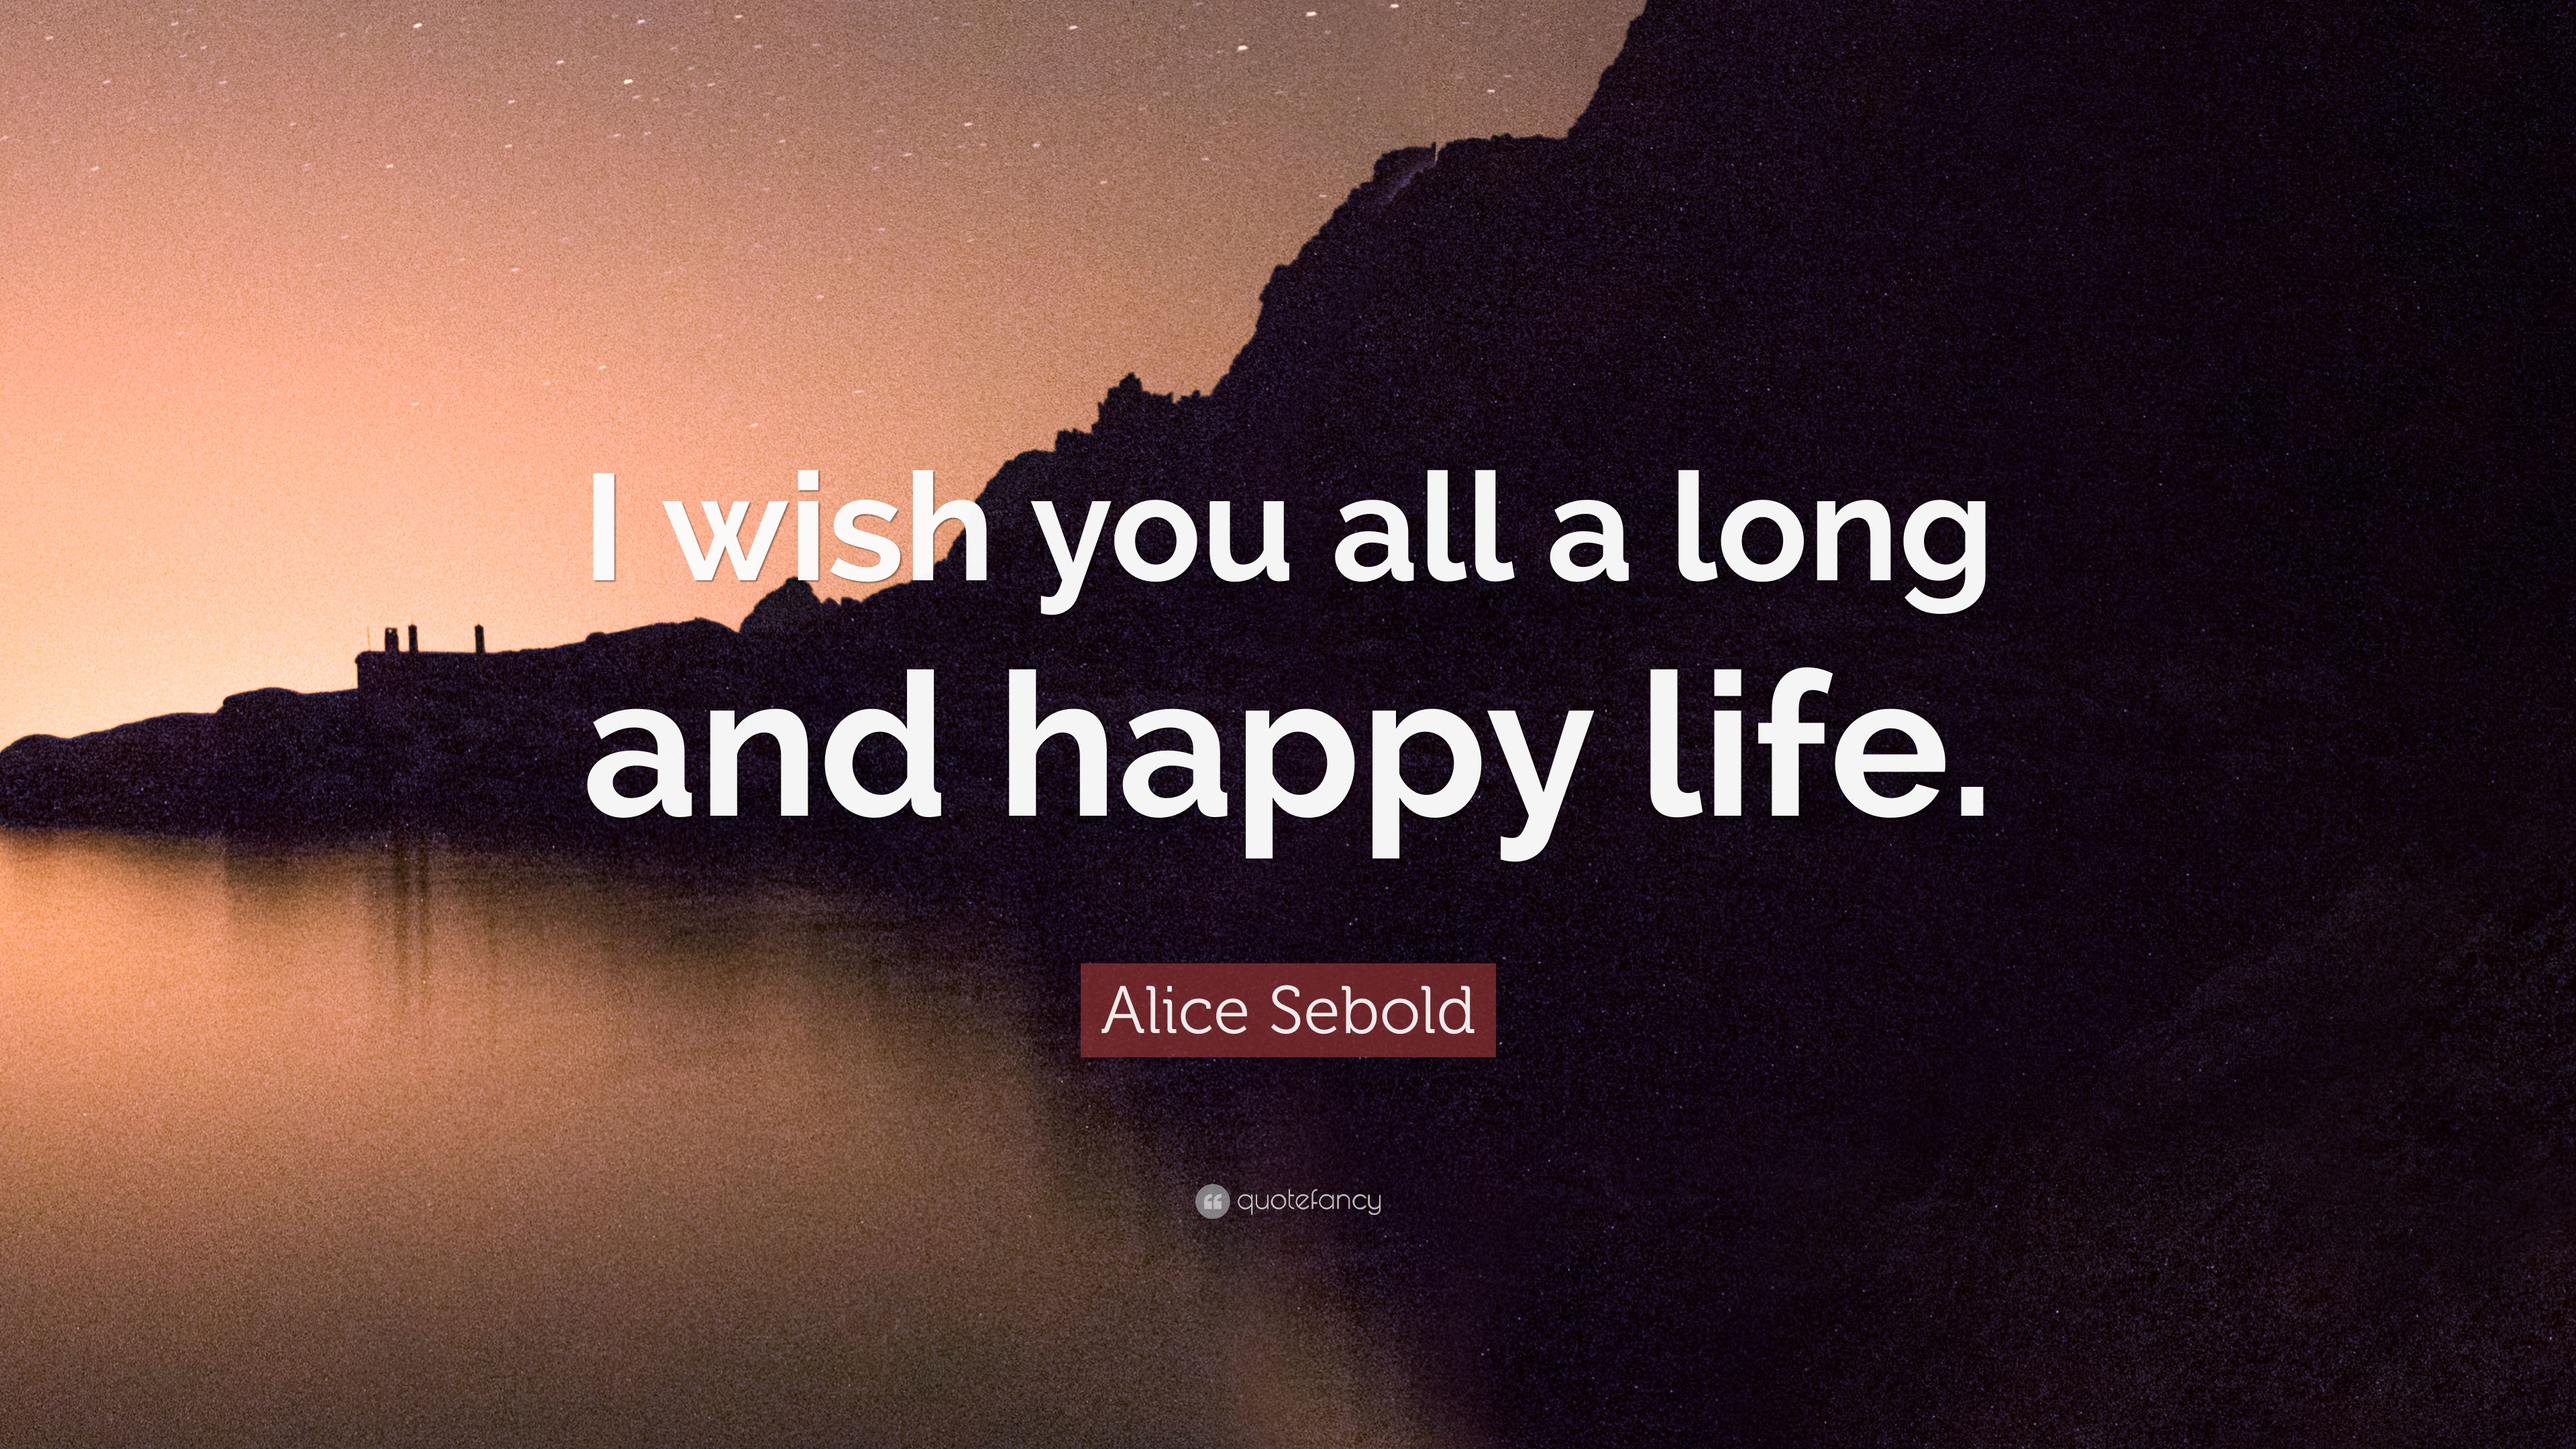 Alice Sebold Quote: “I wish you all a long and happy life.” 7